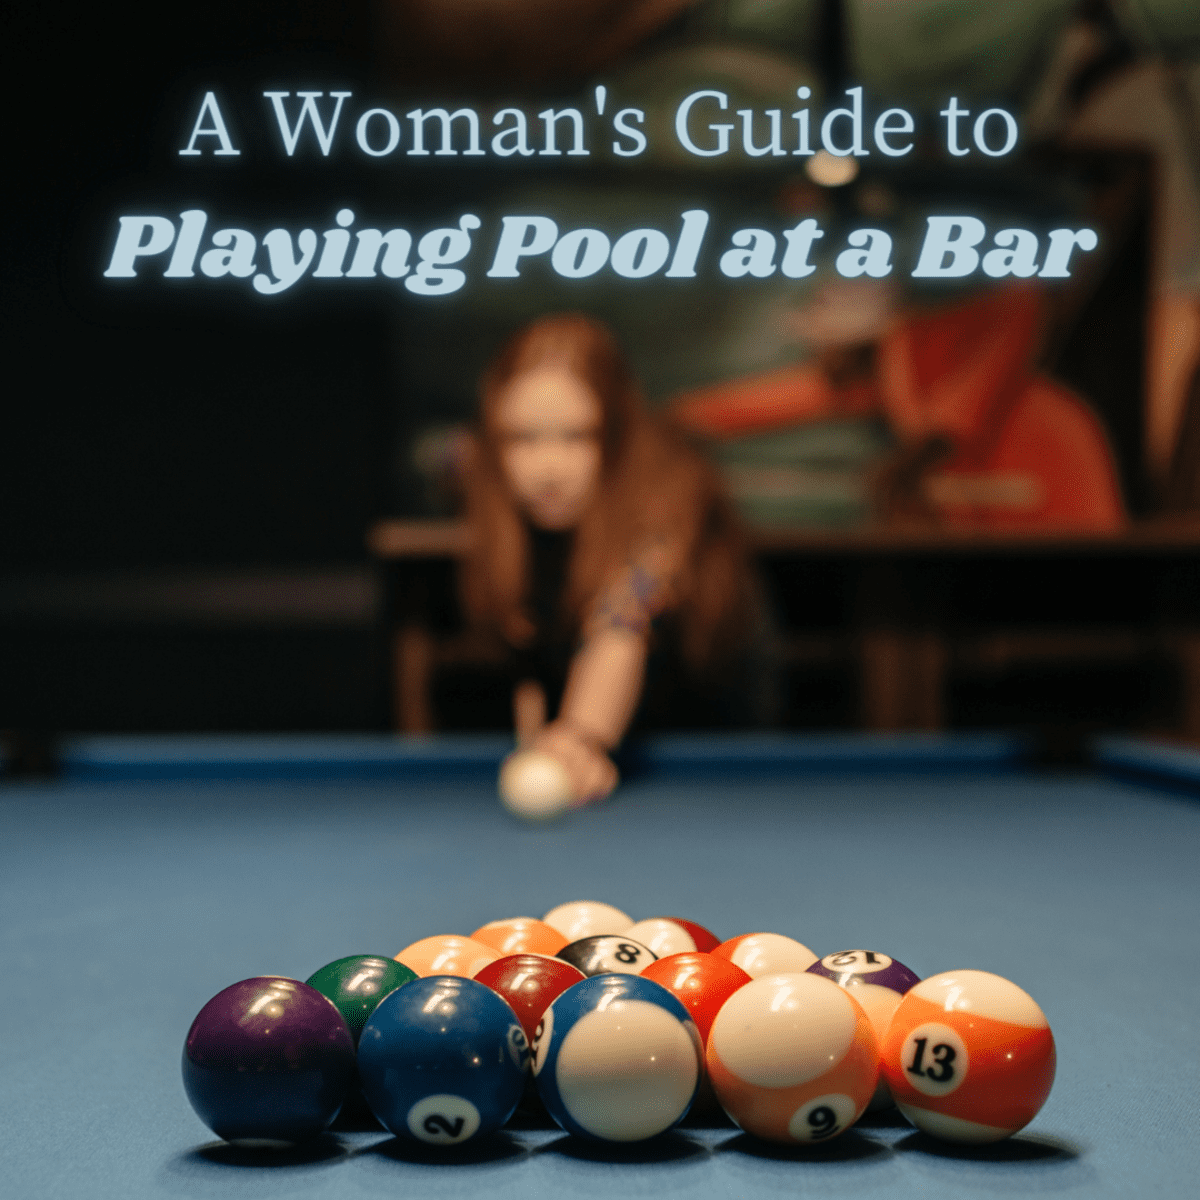 8 ball pool rules – Learn how to play American billiards or pool